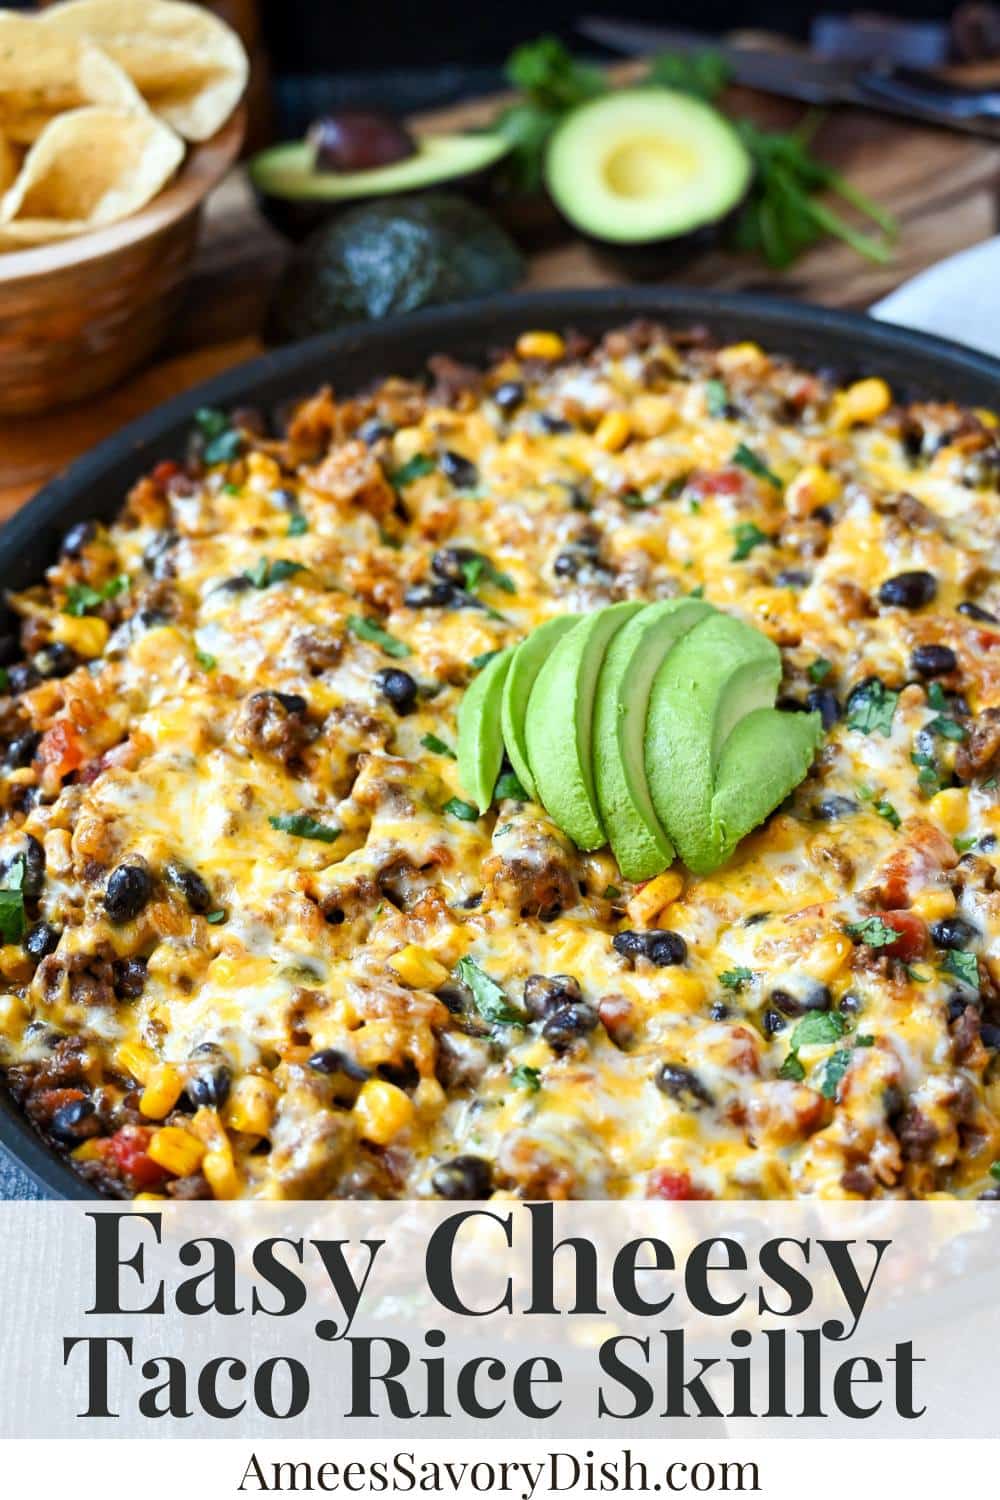 Make this 30-minute, one-pan Cheesy Taco Rice Skillet and enjoy a protein-packed casserole filled with lean ground beef, canned beans, corn, ready rice, melty cheese, and mouthwatering Mexican flavor. via @Ameessavorydish